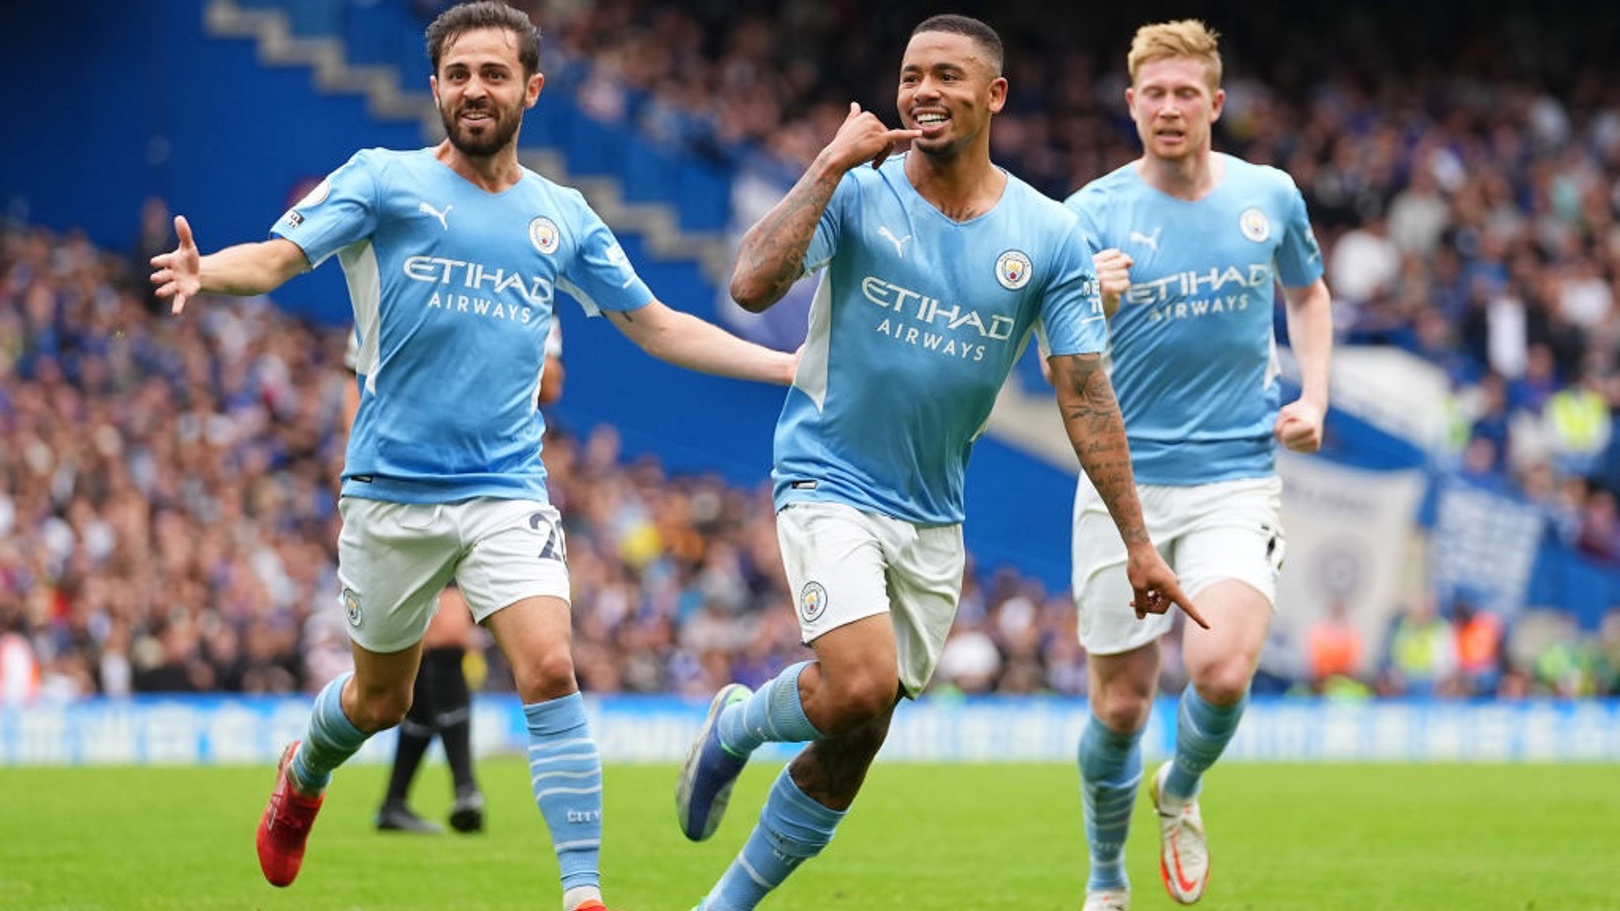 City’s victory at Chelsea wins LMA Performance of the Week Award